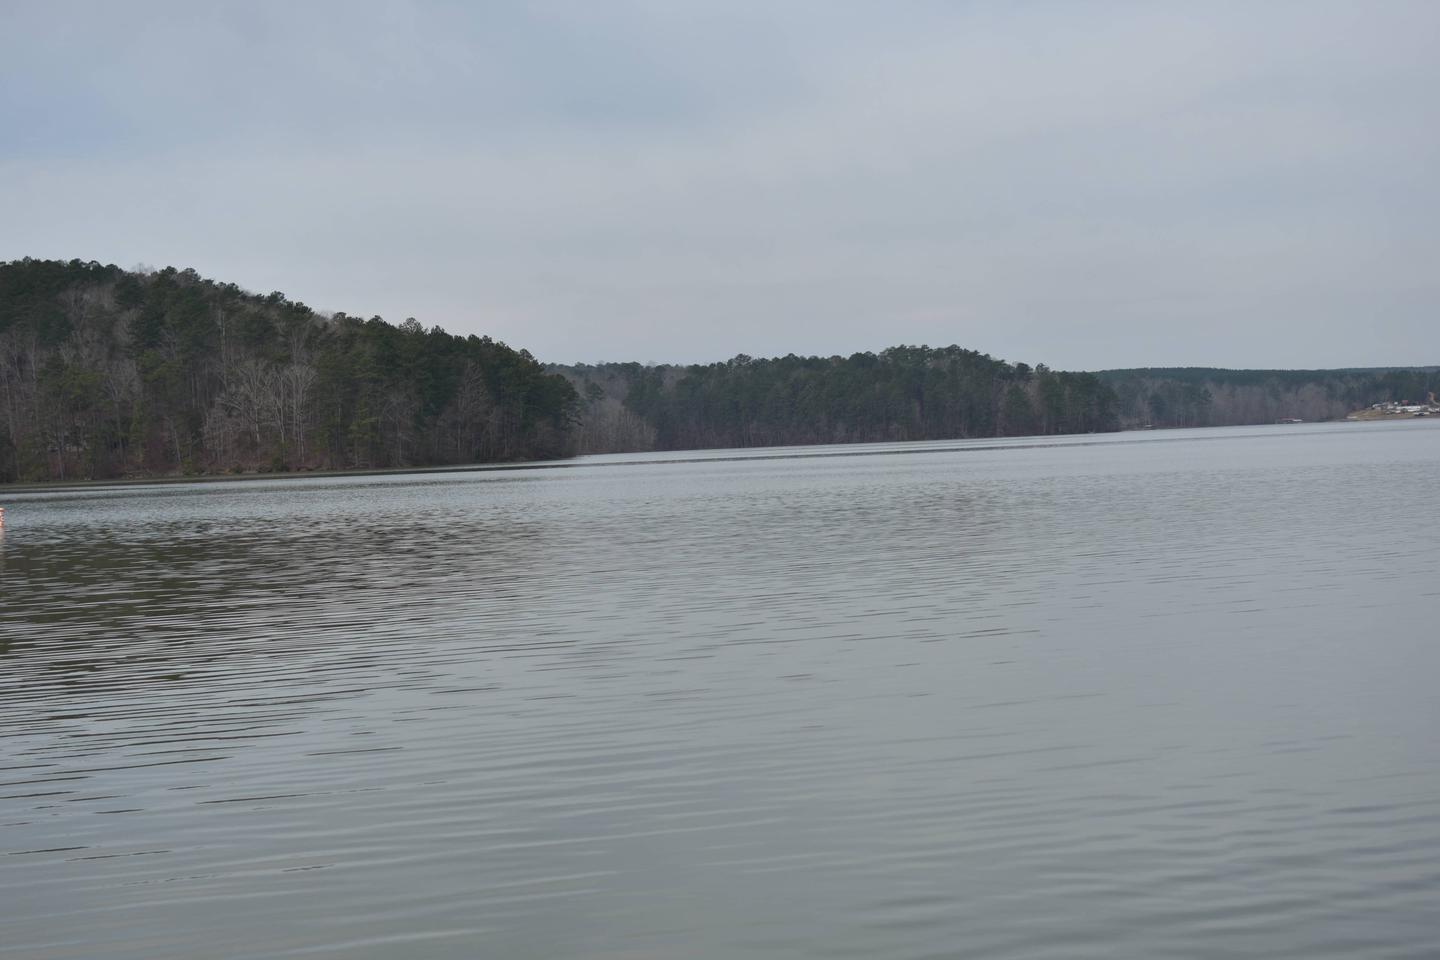 Clear Creek Public Boat Ramp Dock View of Lewis Smith Lake in March.Lewis Smith Lake and the fish await
March 1st, 2020